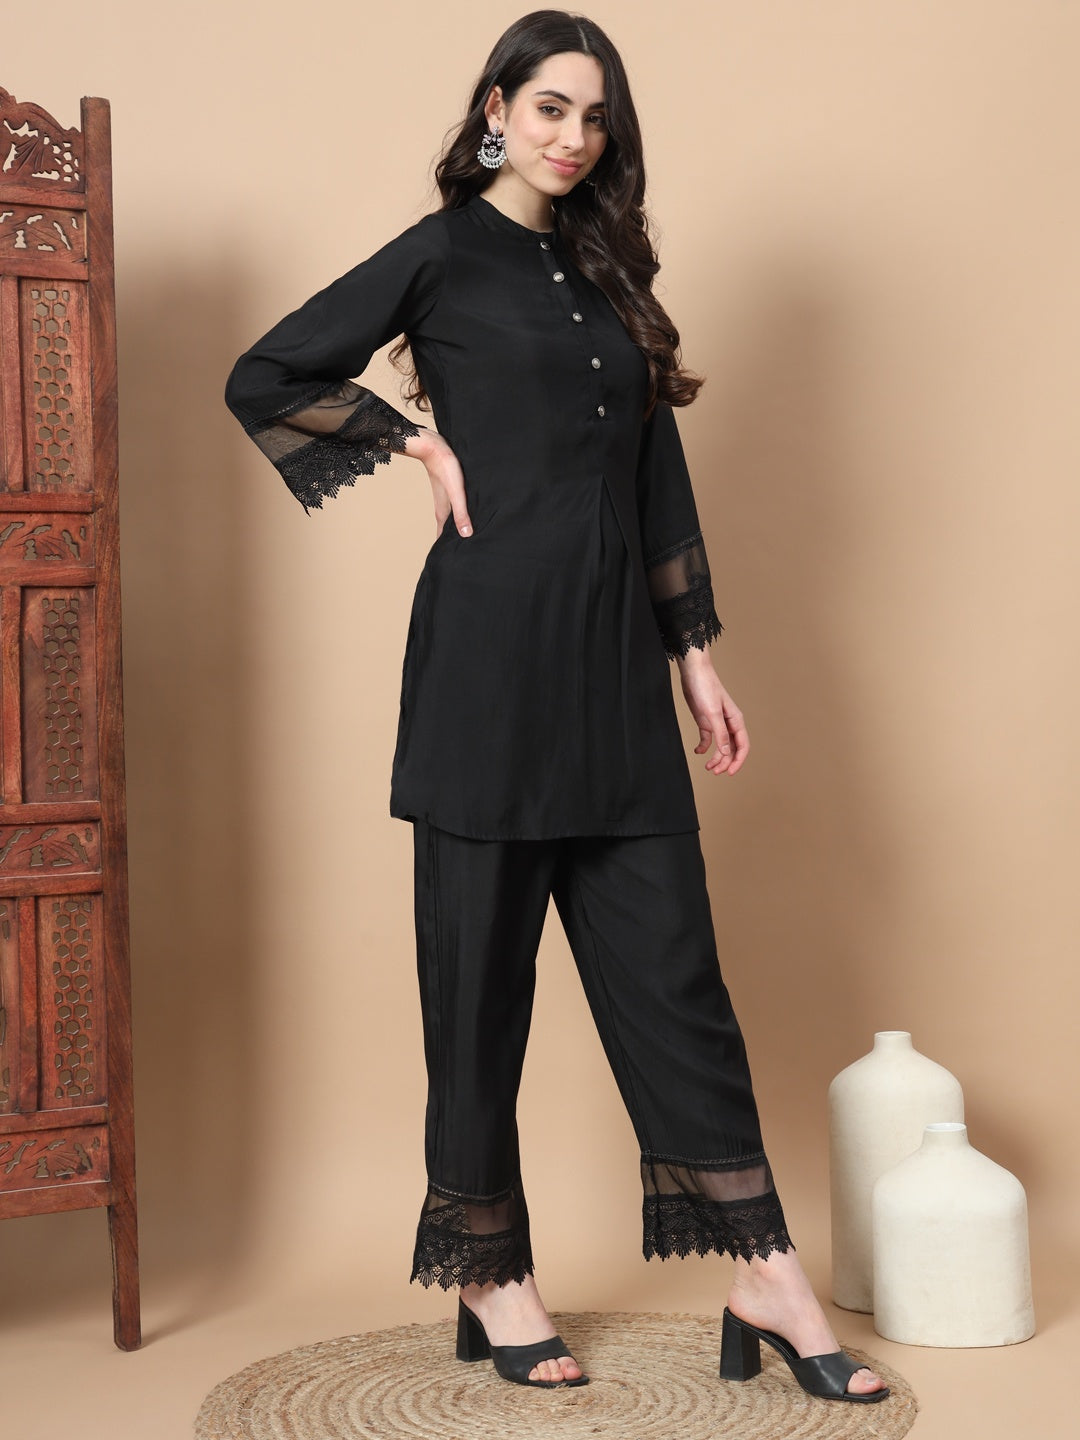 Black Solid Silk Front Button Co-Ord Set With Lace Detailing-Yufta Store-1743CRDBKS